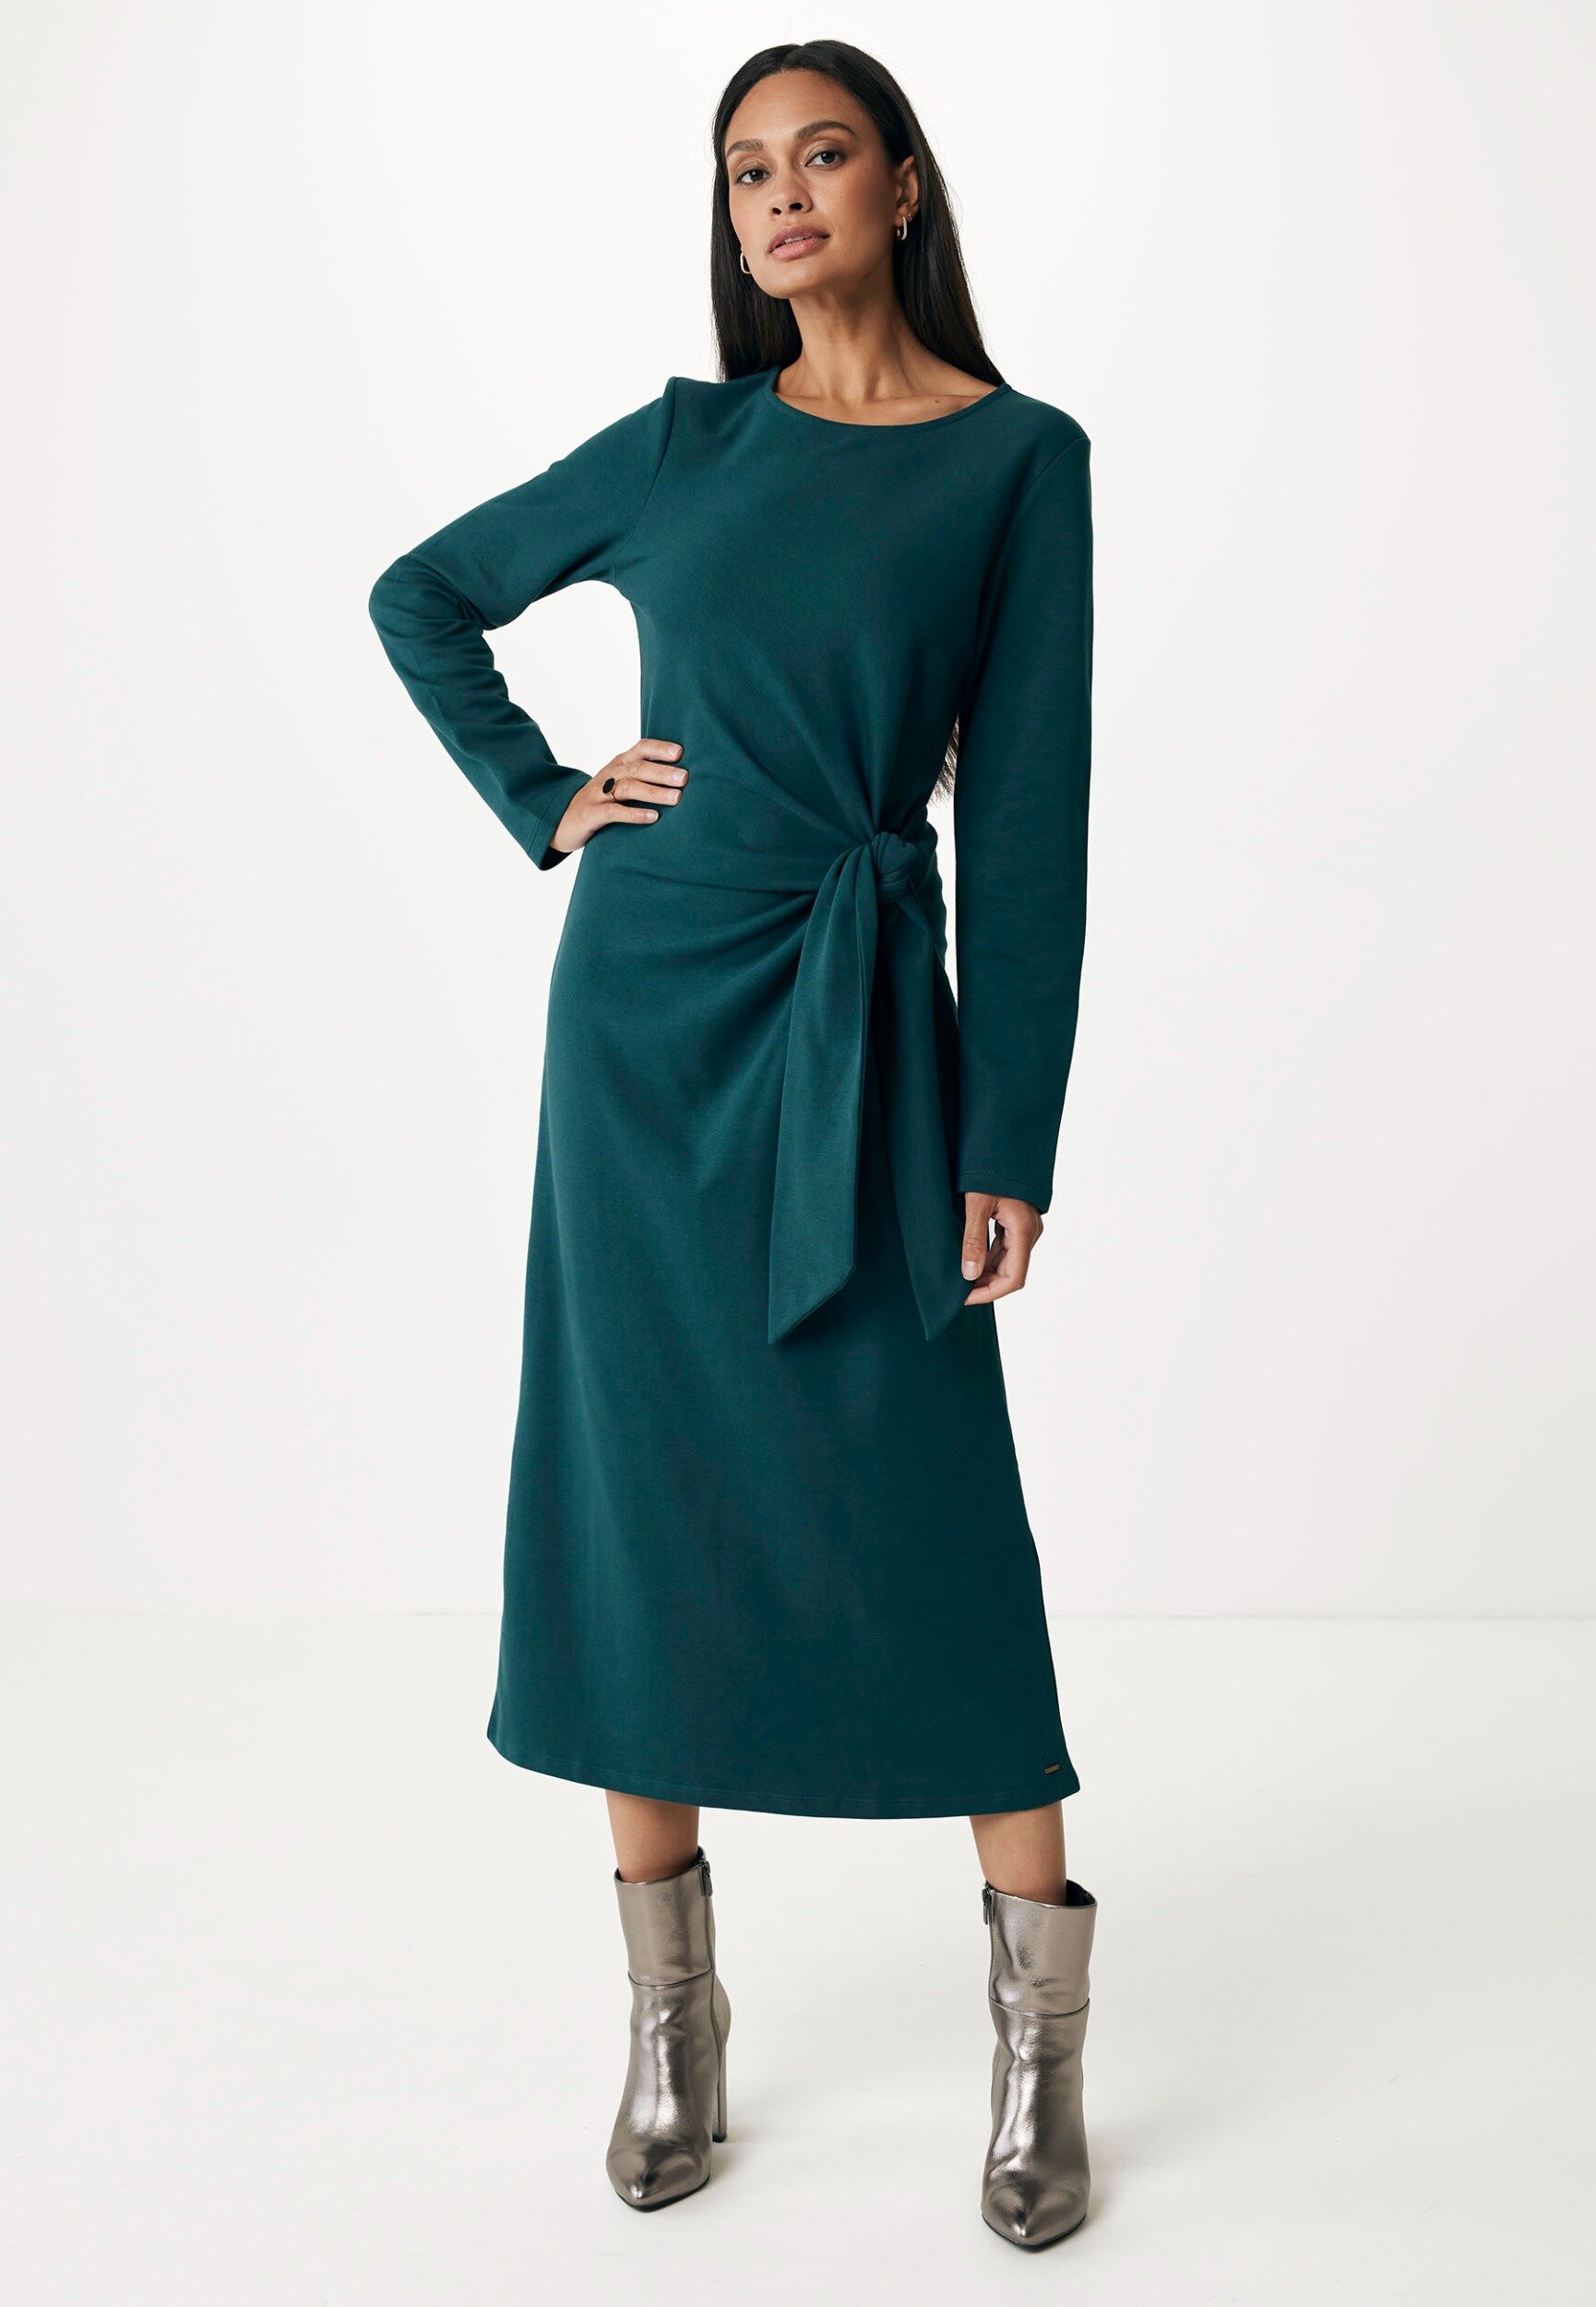 Mexx Lange Mouwen Jurk With Knotted Detail At Waist Dames - Donker Groen - Maat M